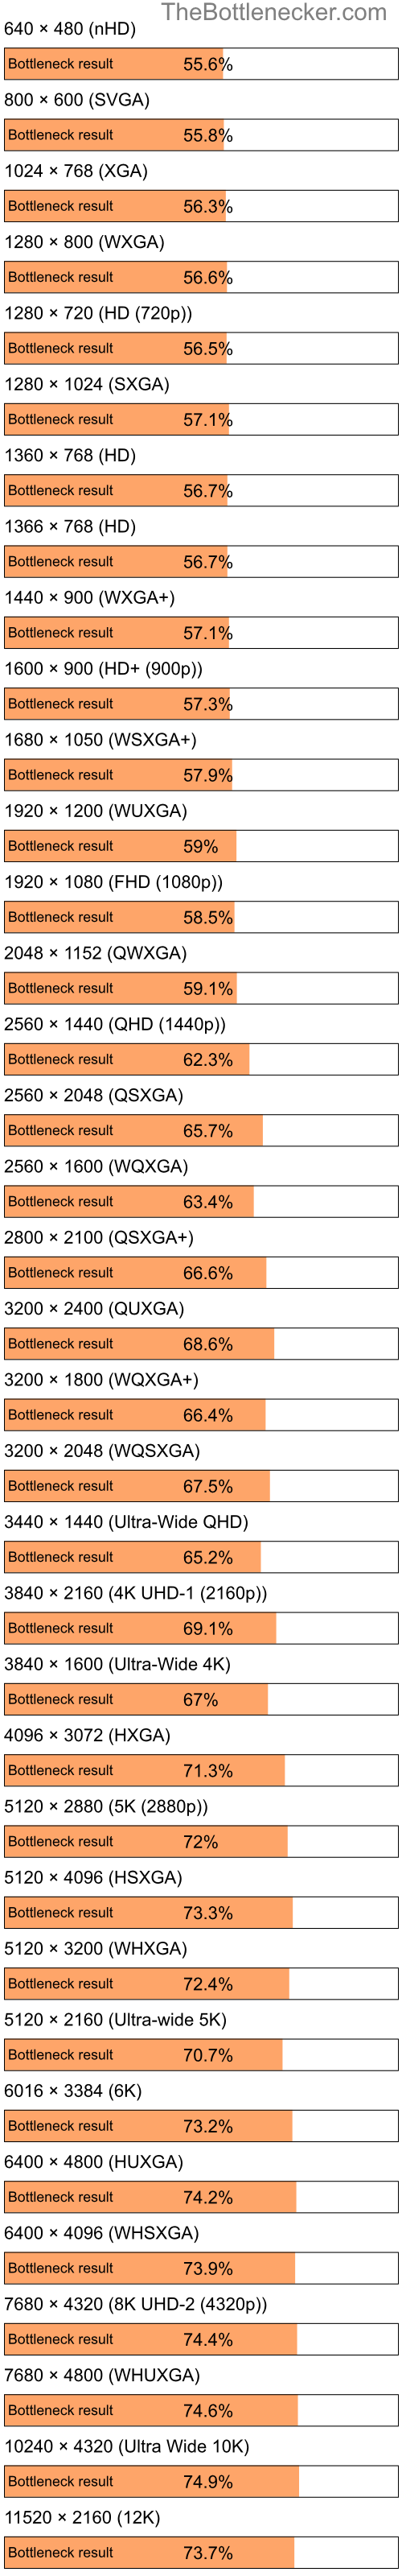 Bottleneck results by resolution for Intel Pentium 4 and AMD Radeon HD 7290 in General Tasks